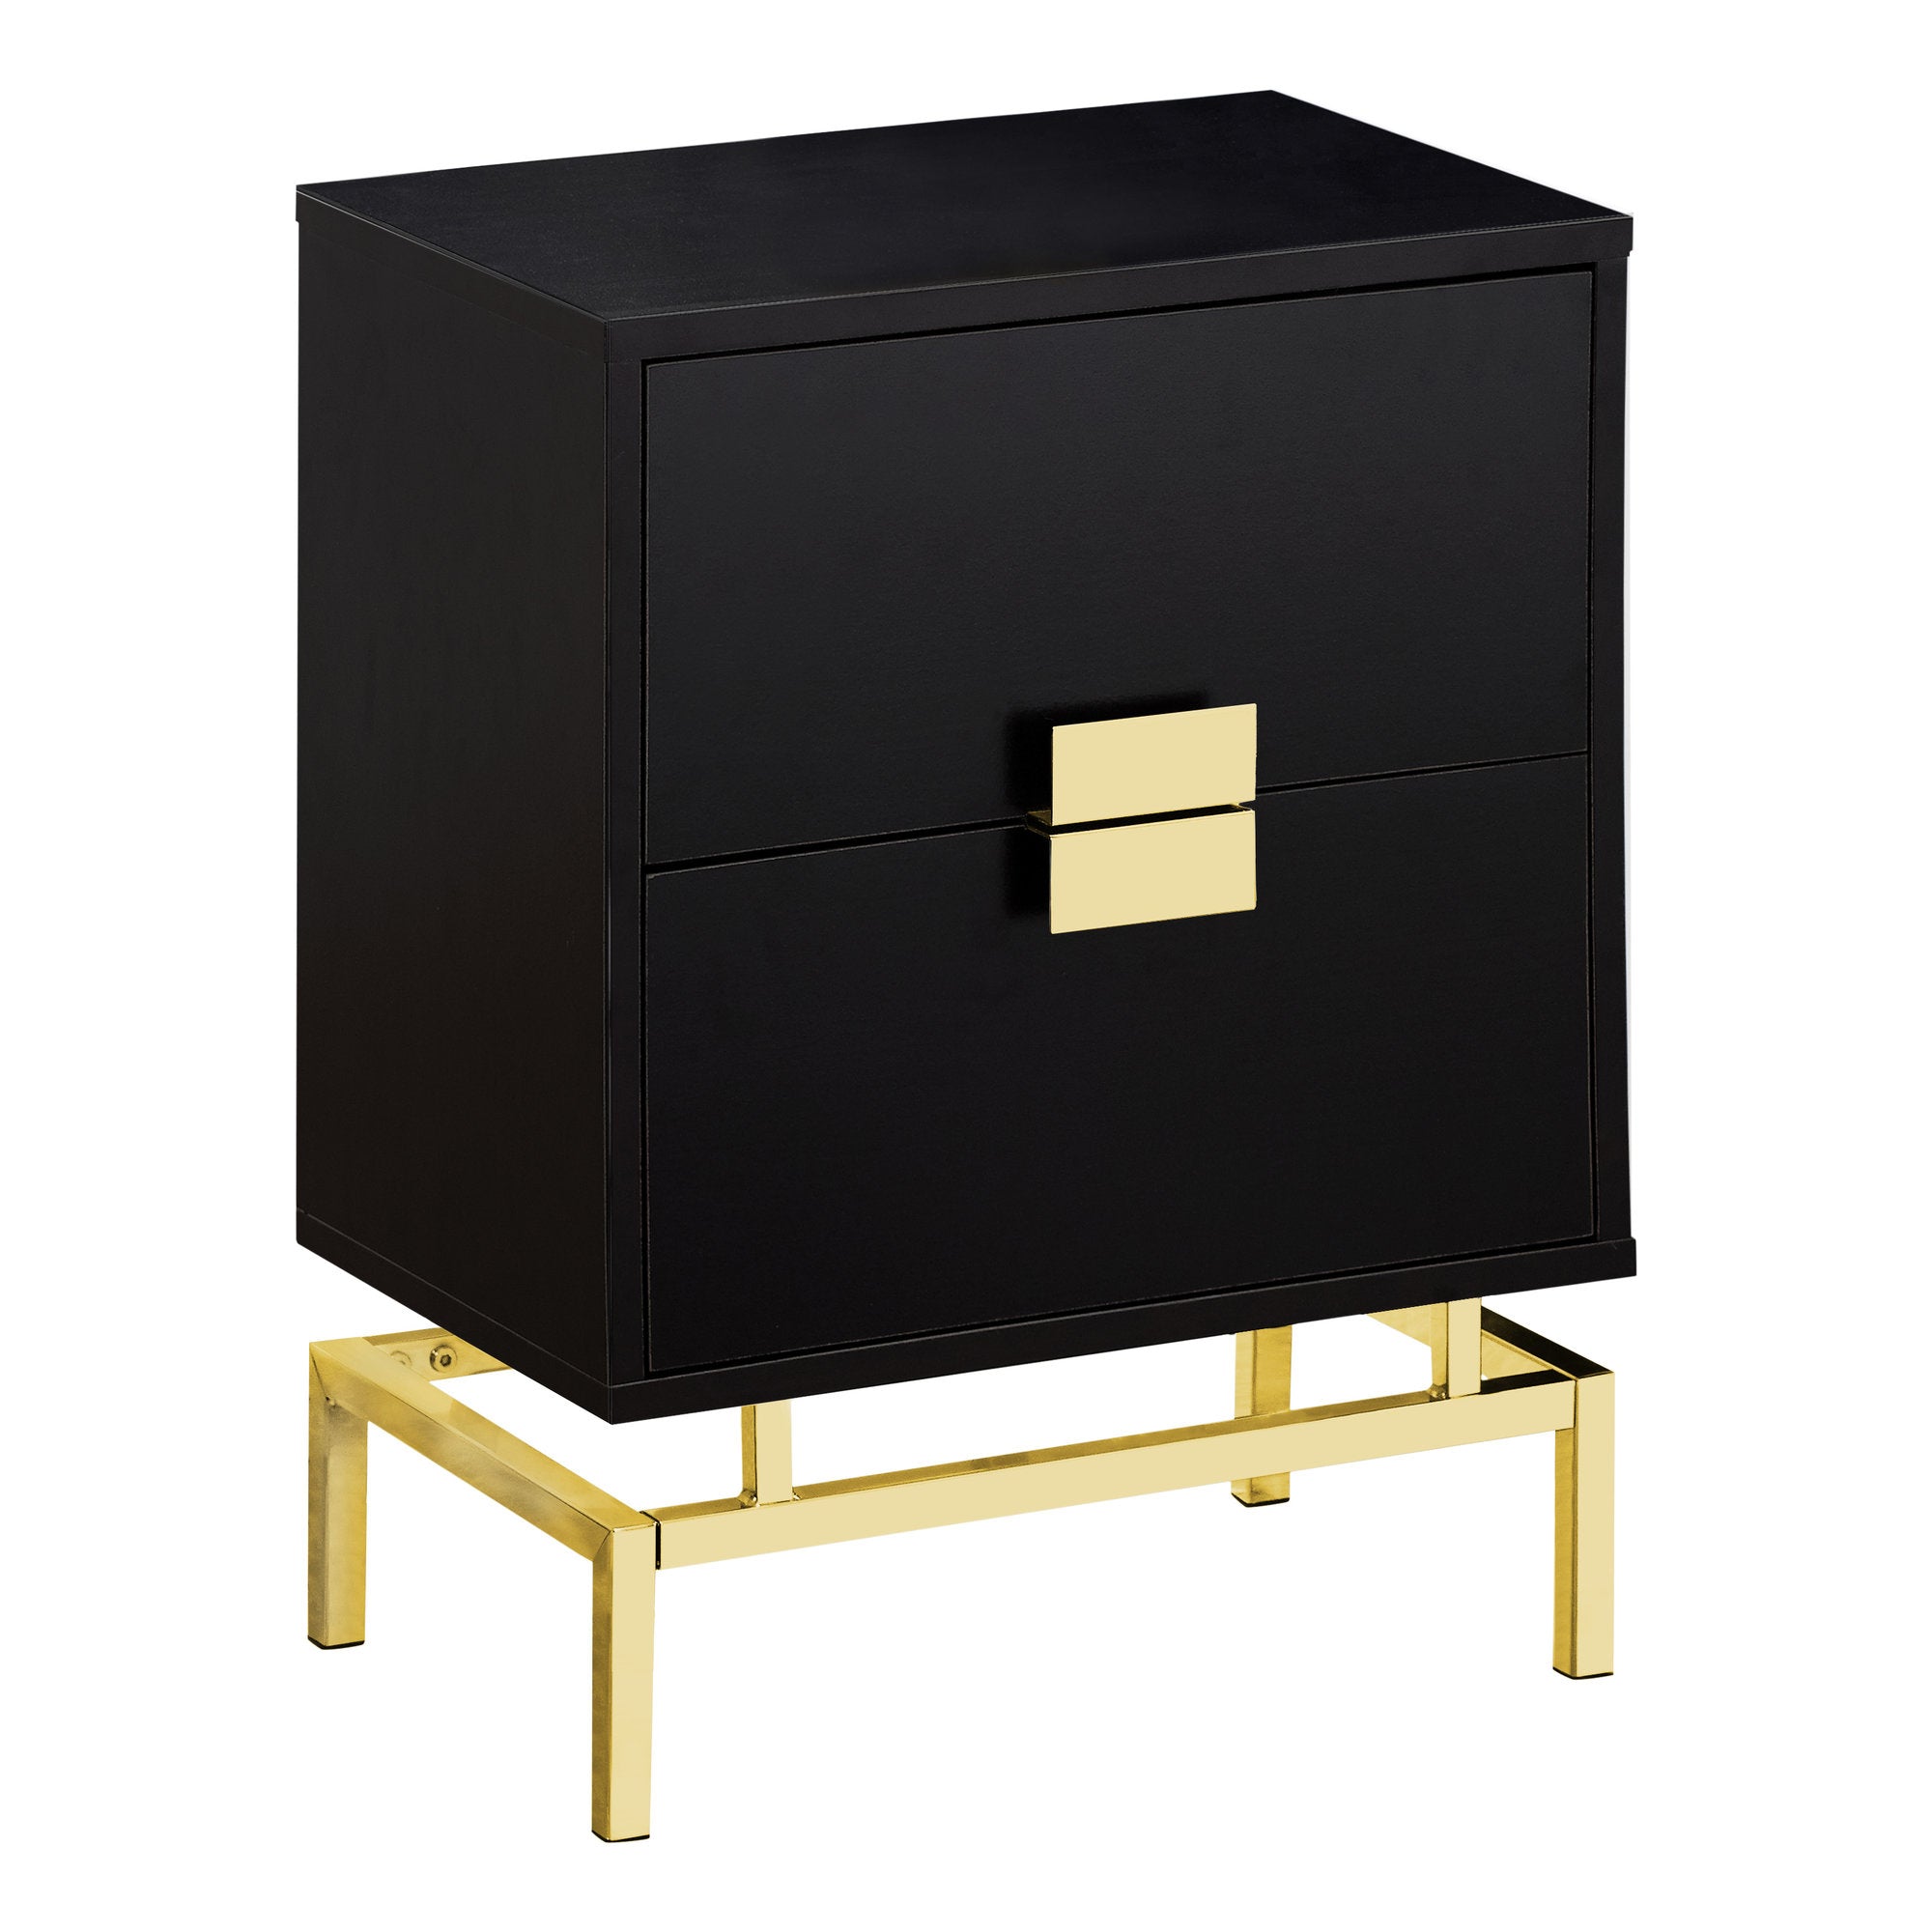 MN-963496    Accent Table, Side, End, Nightstand, Lamp, Living Room, Bedroom, Metal Legs, Laminate, Dark Brown, Gold, Contemporary, Modern